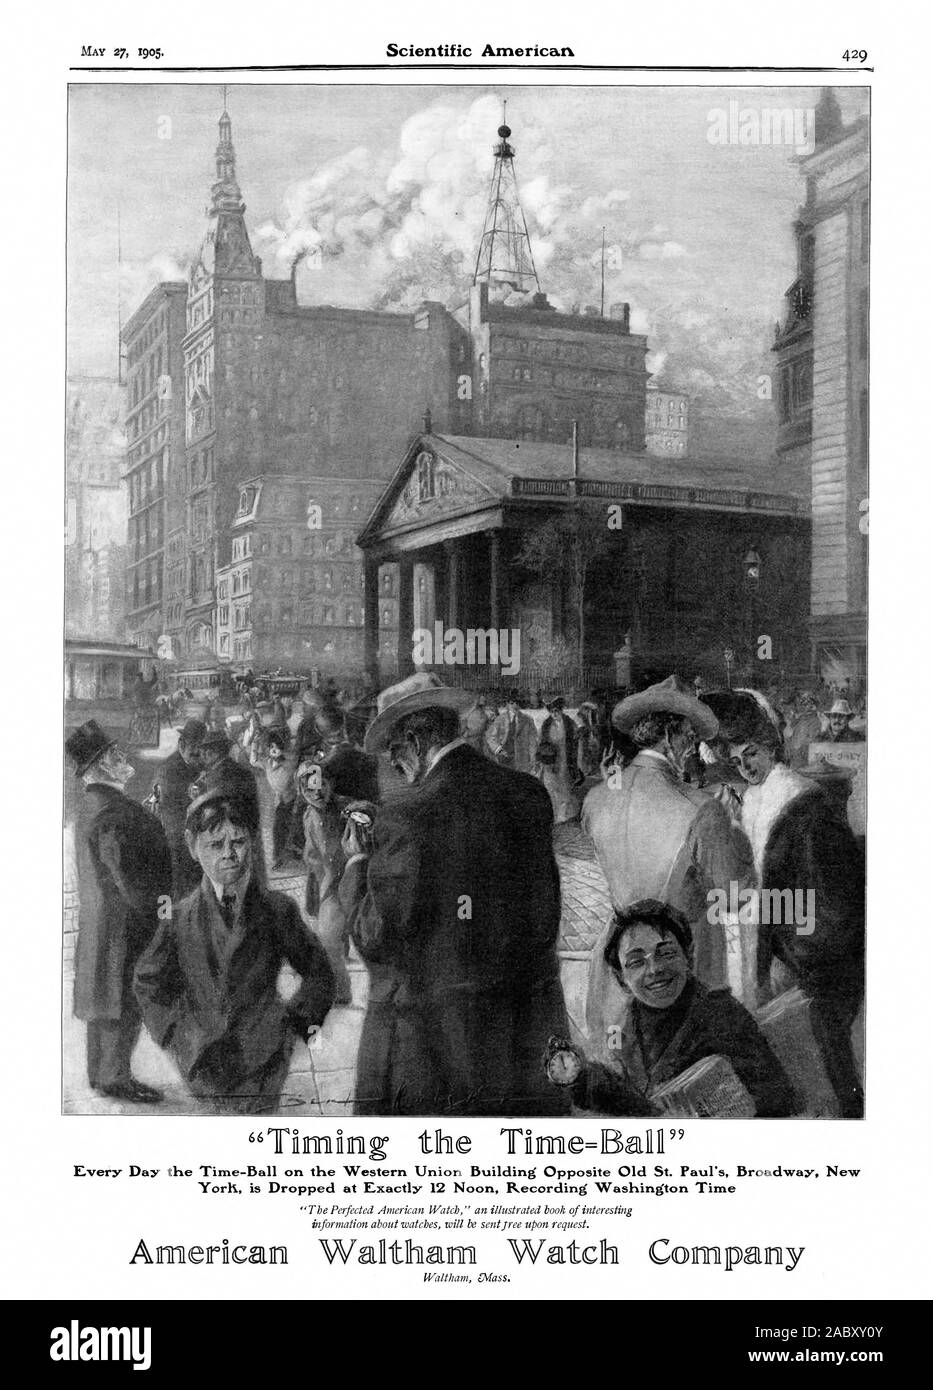 Every Day the Time-Ball on the Western Union Building Opposite Old St. Paul's Broadway New Yorli is Dropped at Exactly 12 Noon Recording Washington Time, scientific american, 1905-05-27 Stock Photo